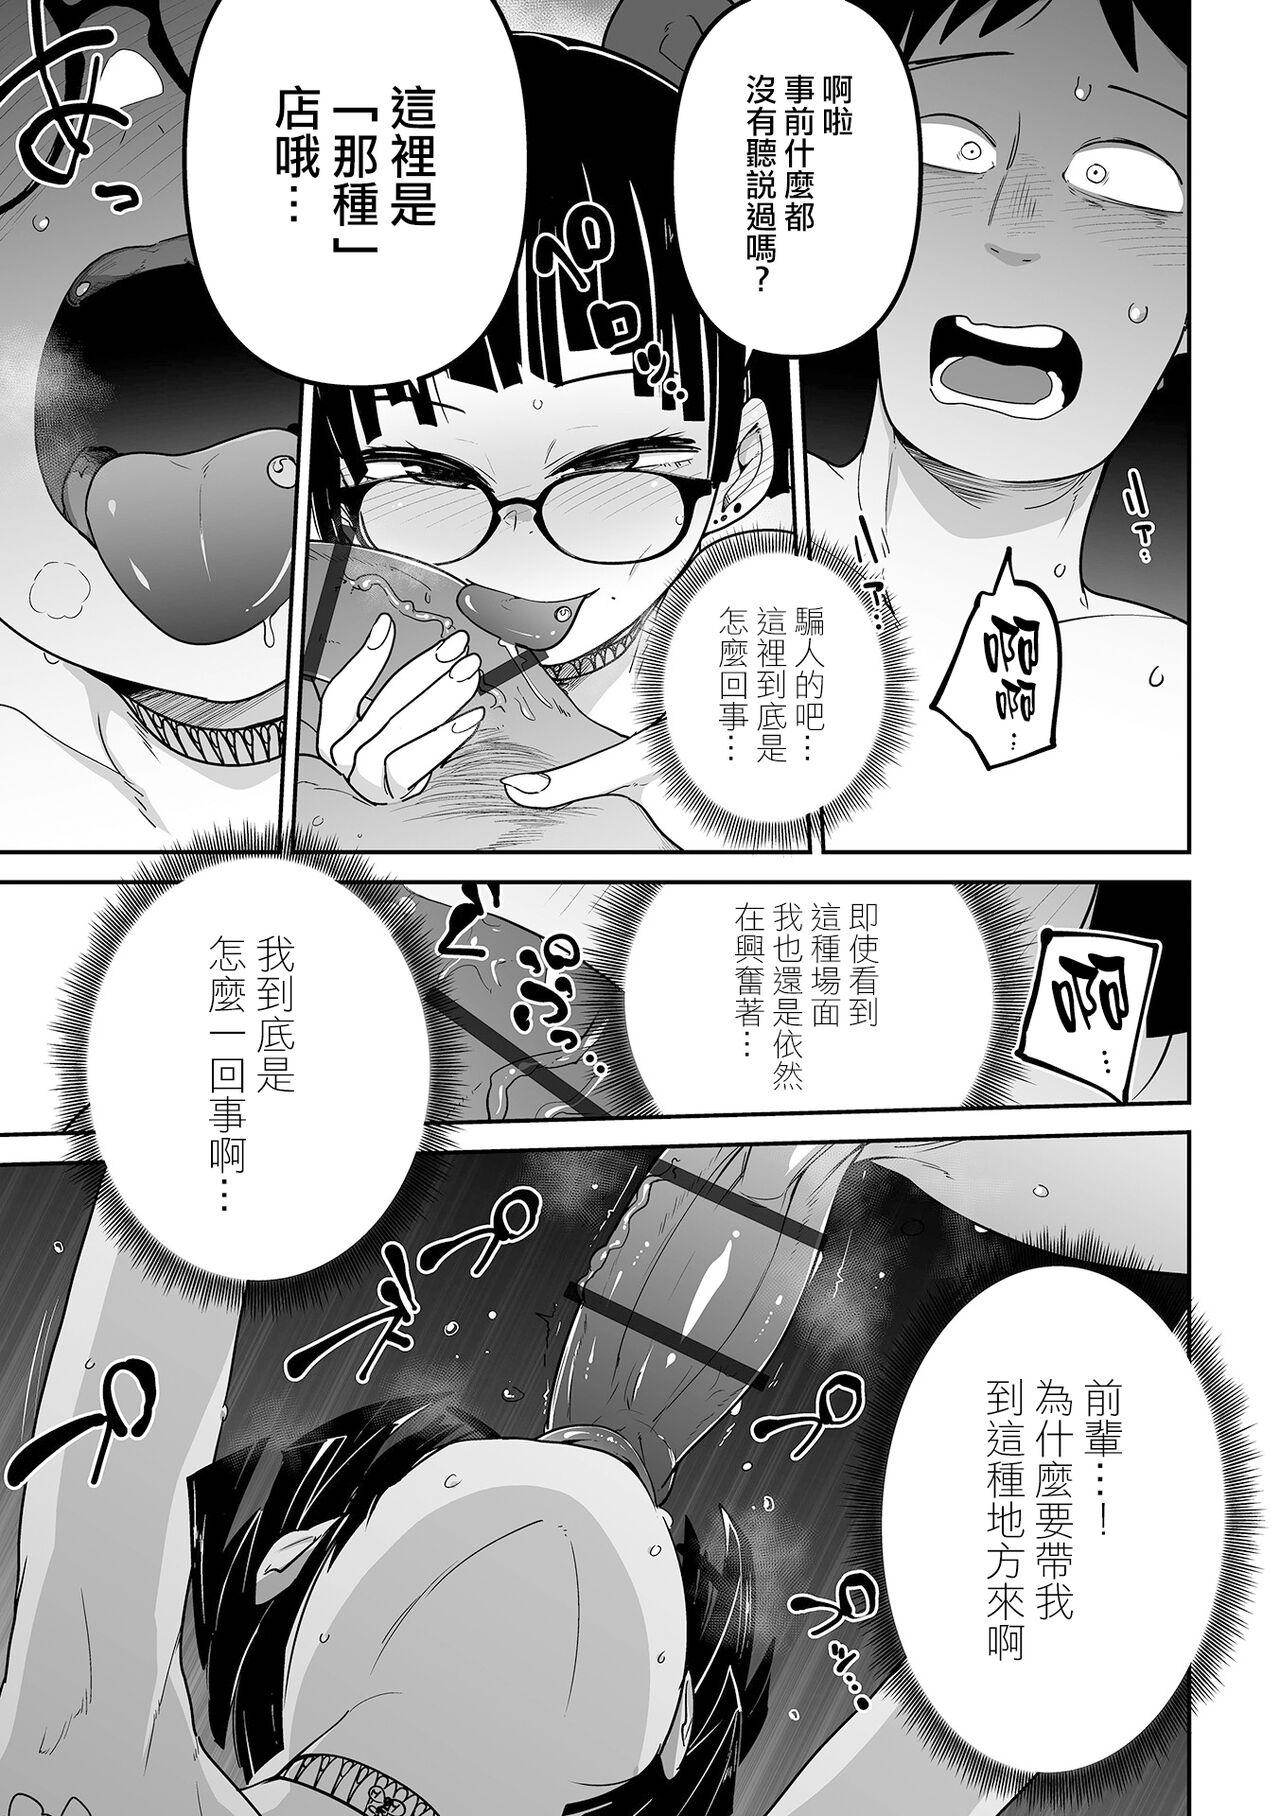 Amature Sex Kesson Shoukan e Youkoso | 歡迎來到殘缺娼館！ Pay - Page 10